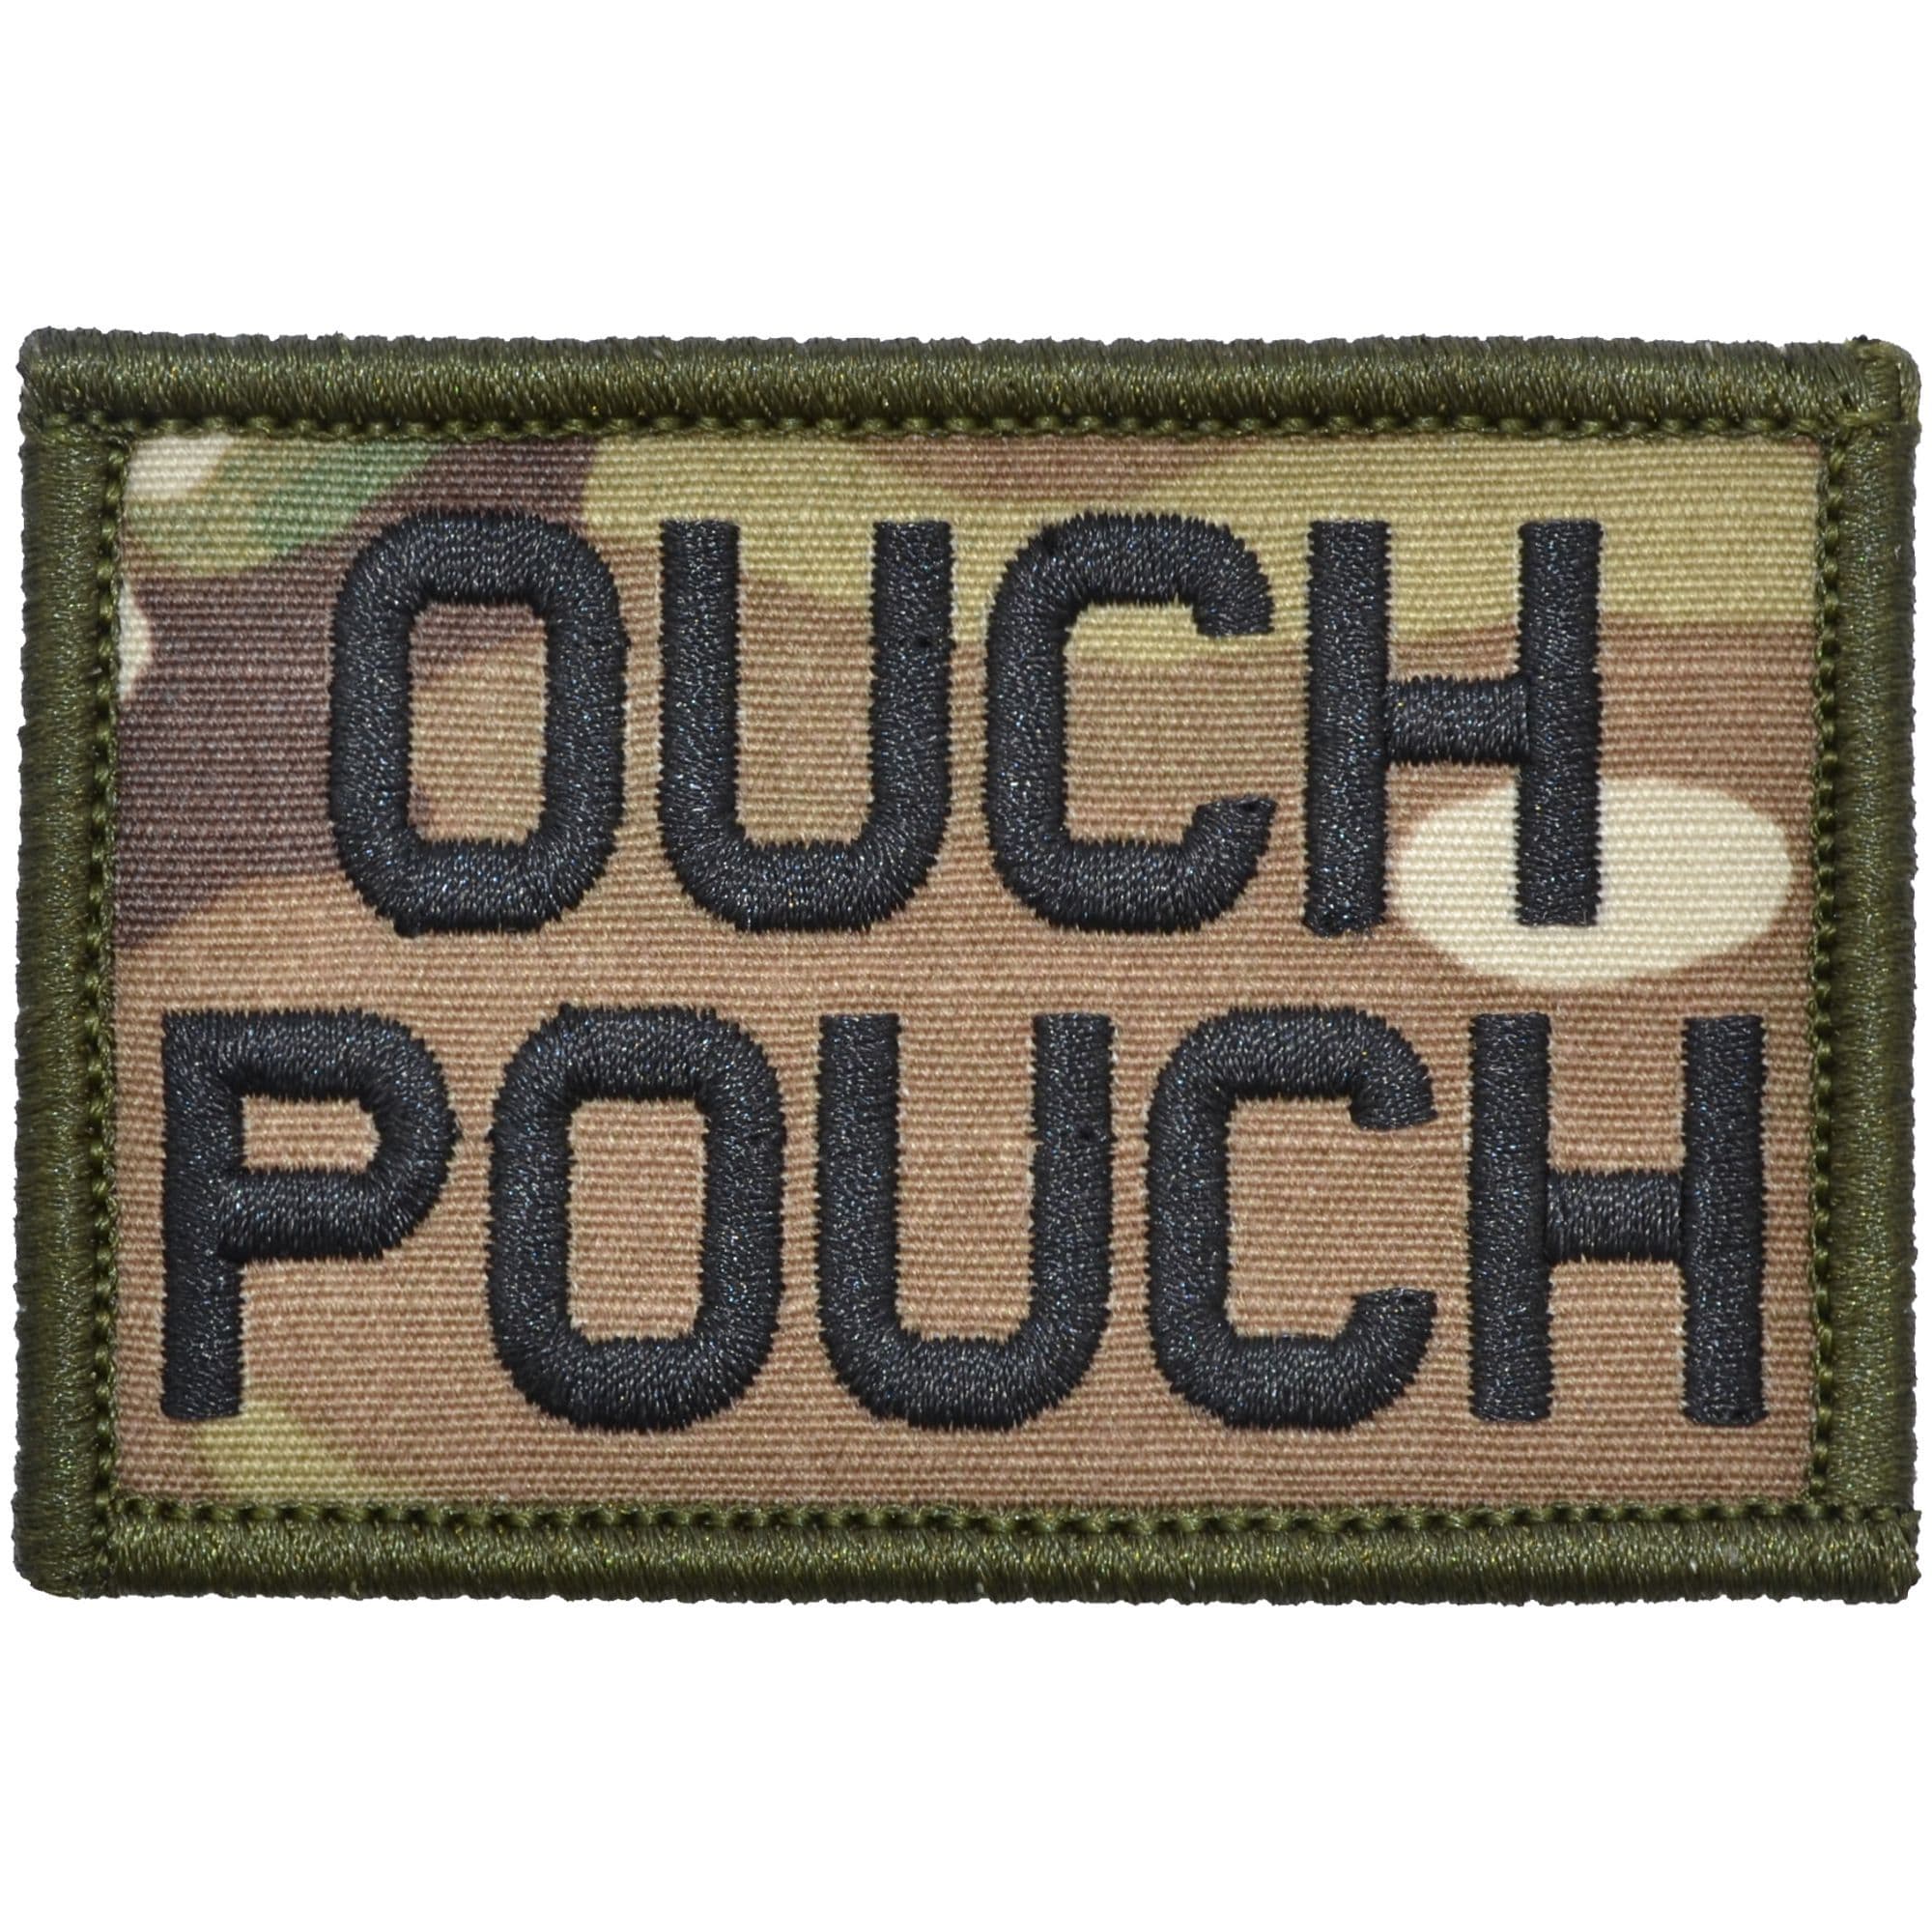 Ouch Pouch Ranger Tactical Patch Army Marines Morale Hook and Loop FREE USA  SHIP